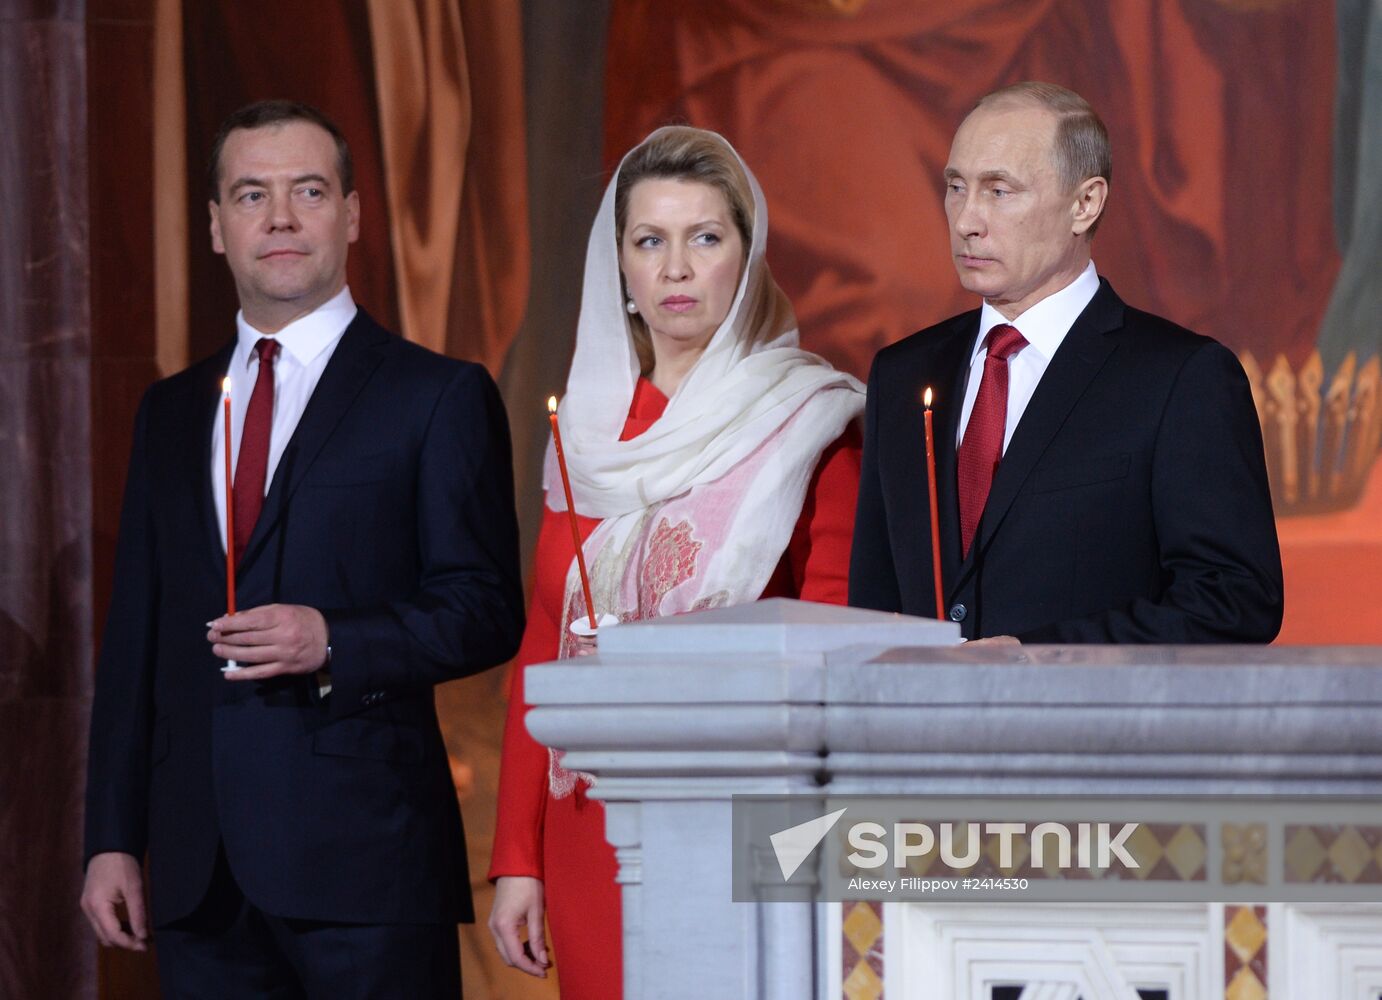 Vladimir Putin and Dmitry Medvedev attend Easter service at Christ the Savior Cathedral in Moscow